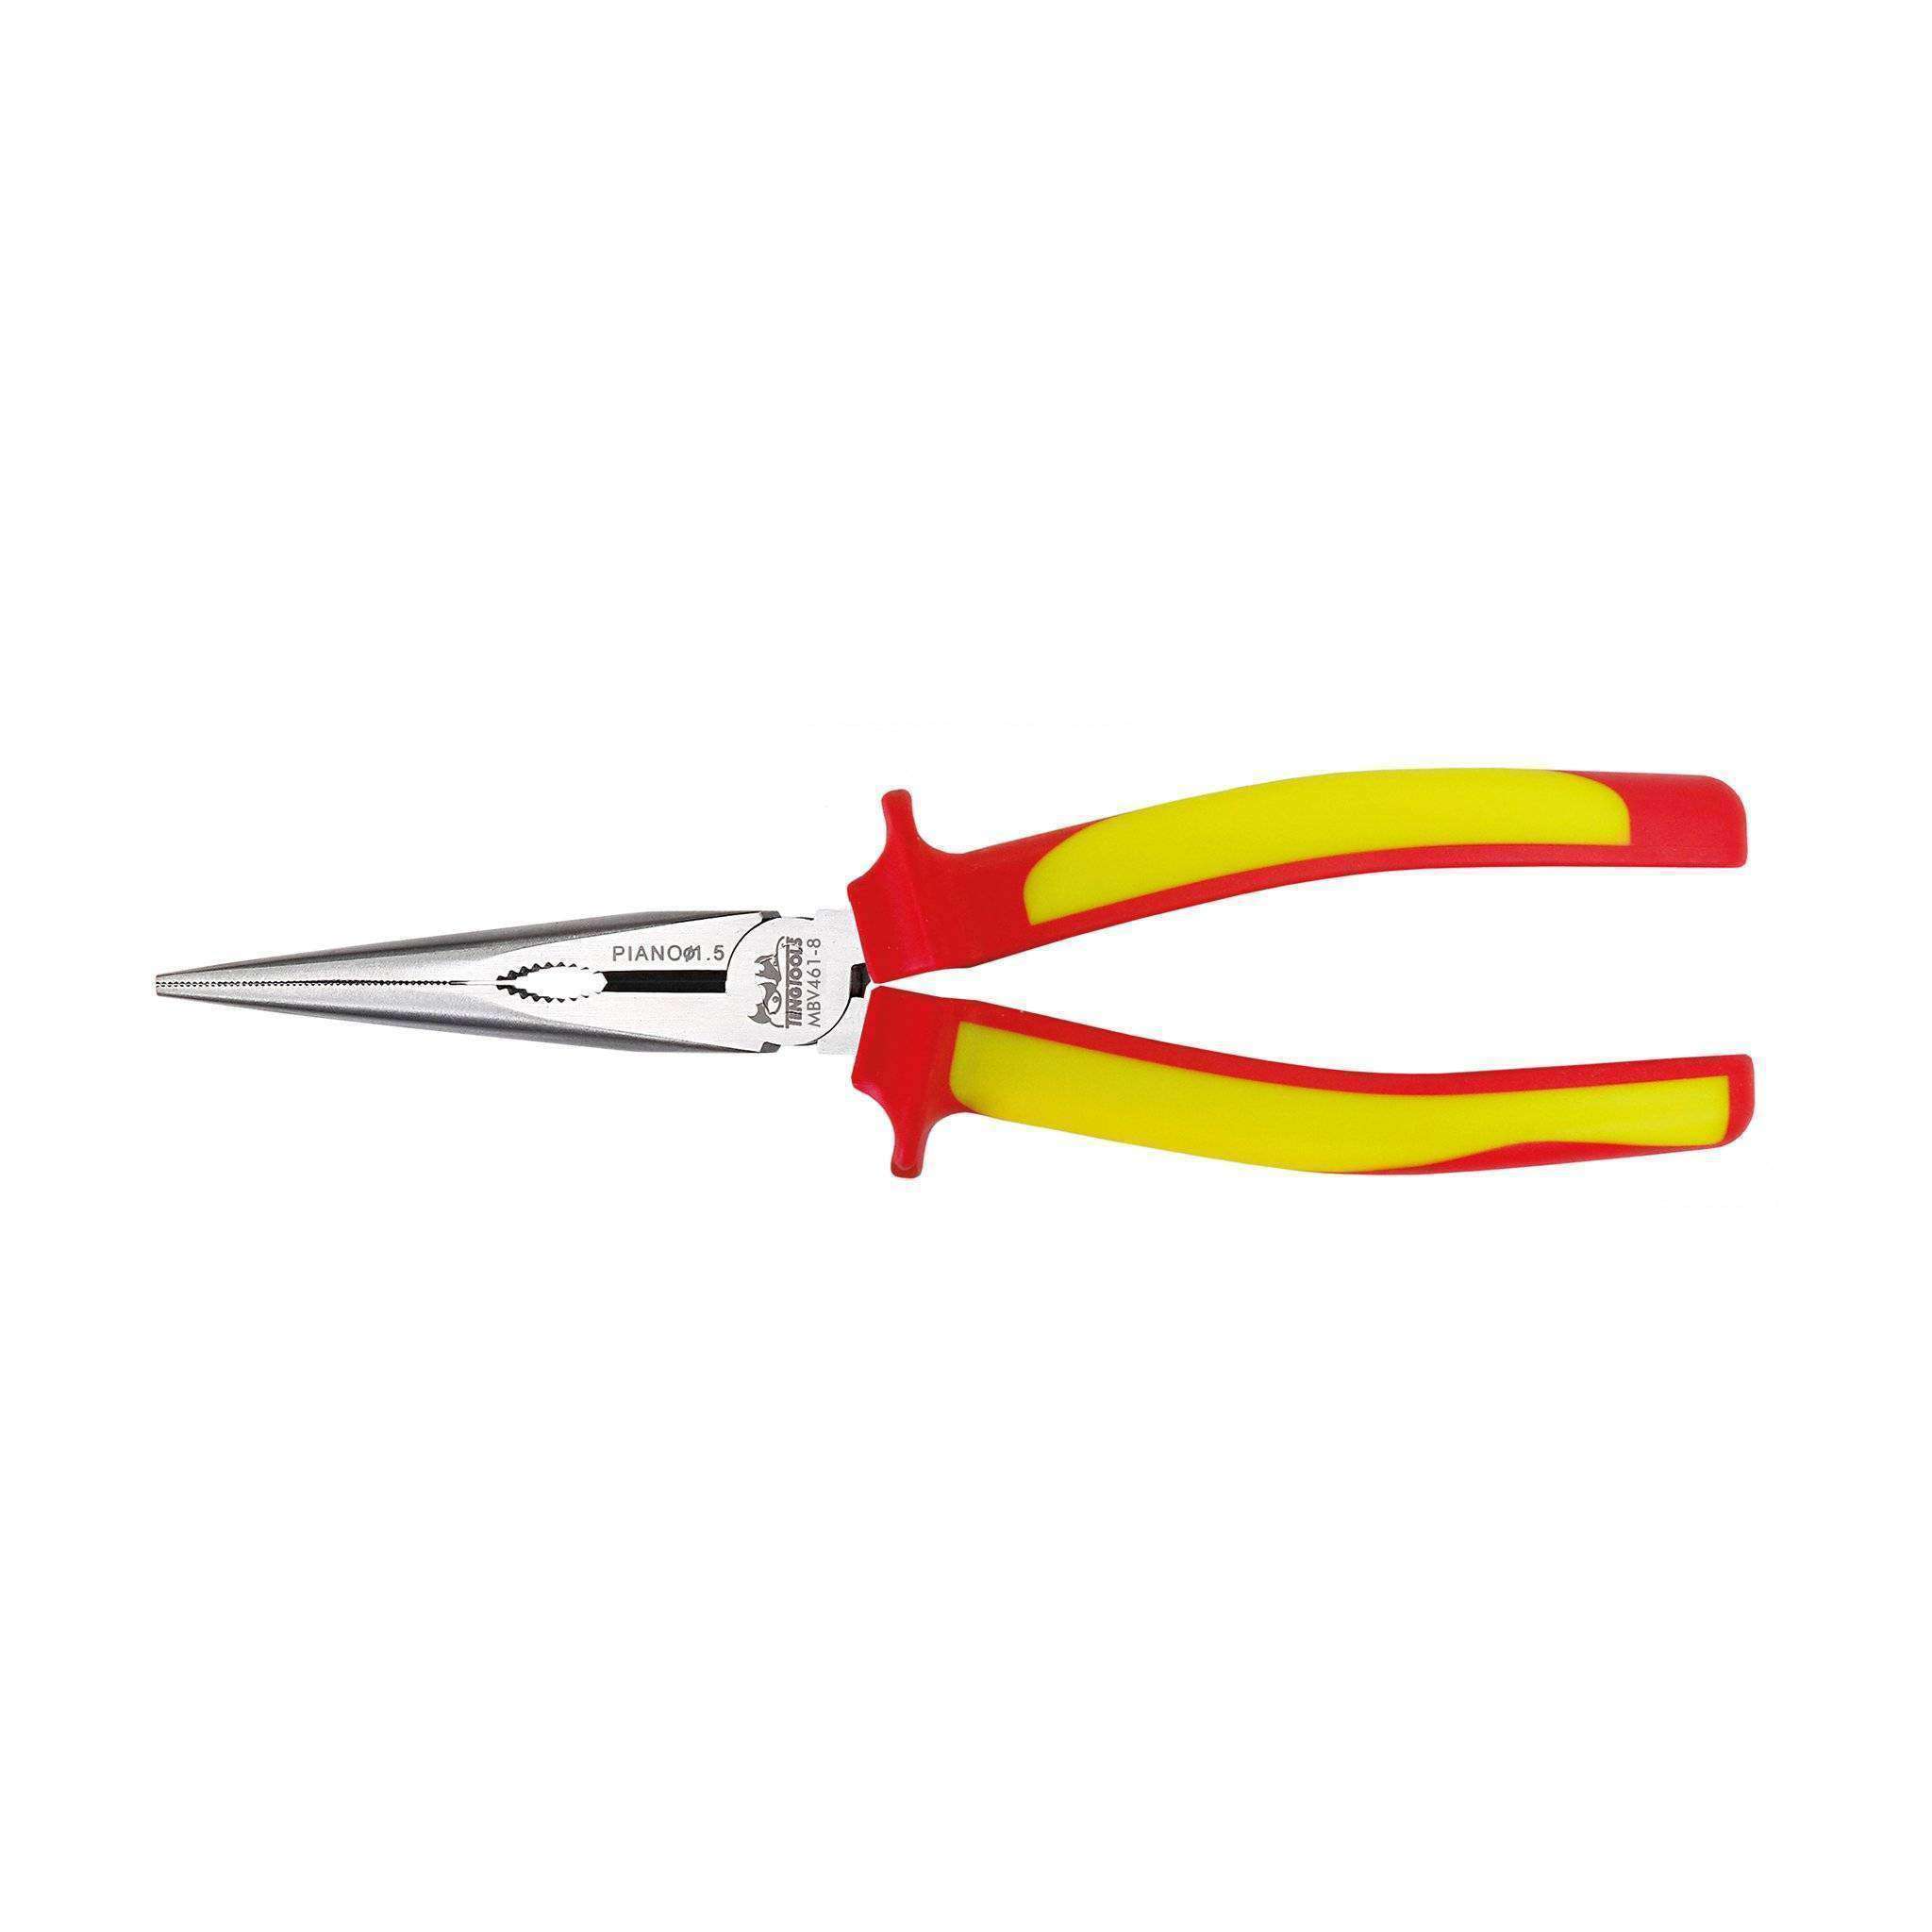 Teng Tools 8 Inch 1000 Volt Insulated Mega Bite Long Nose Pliers - MBV461-8